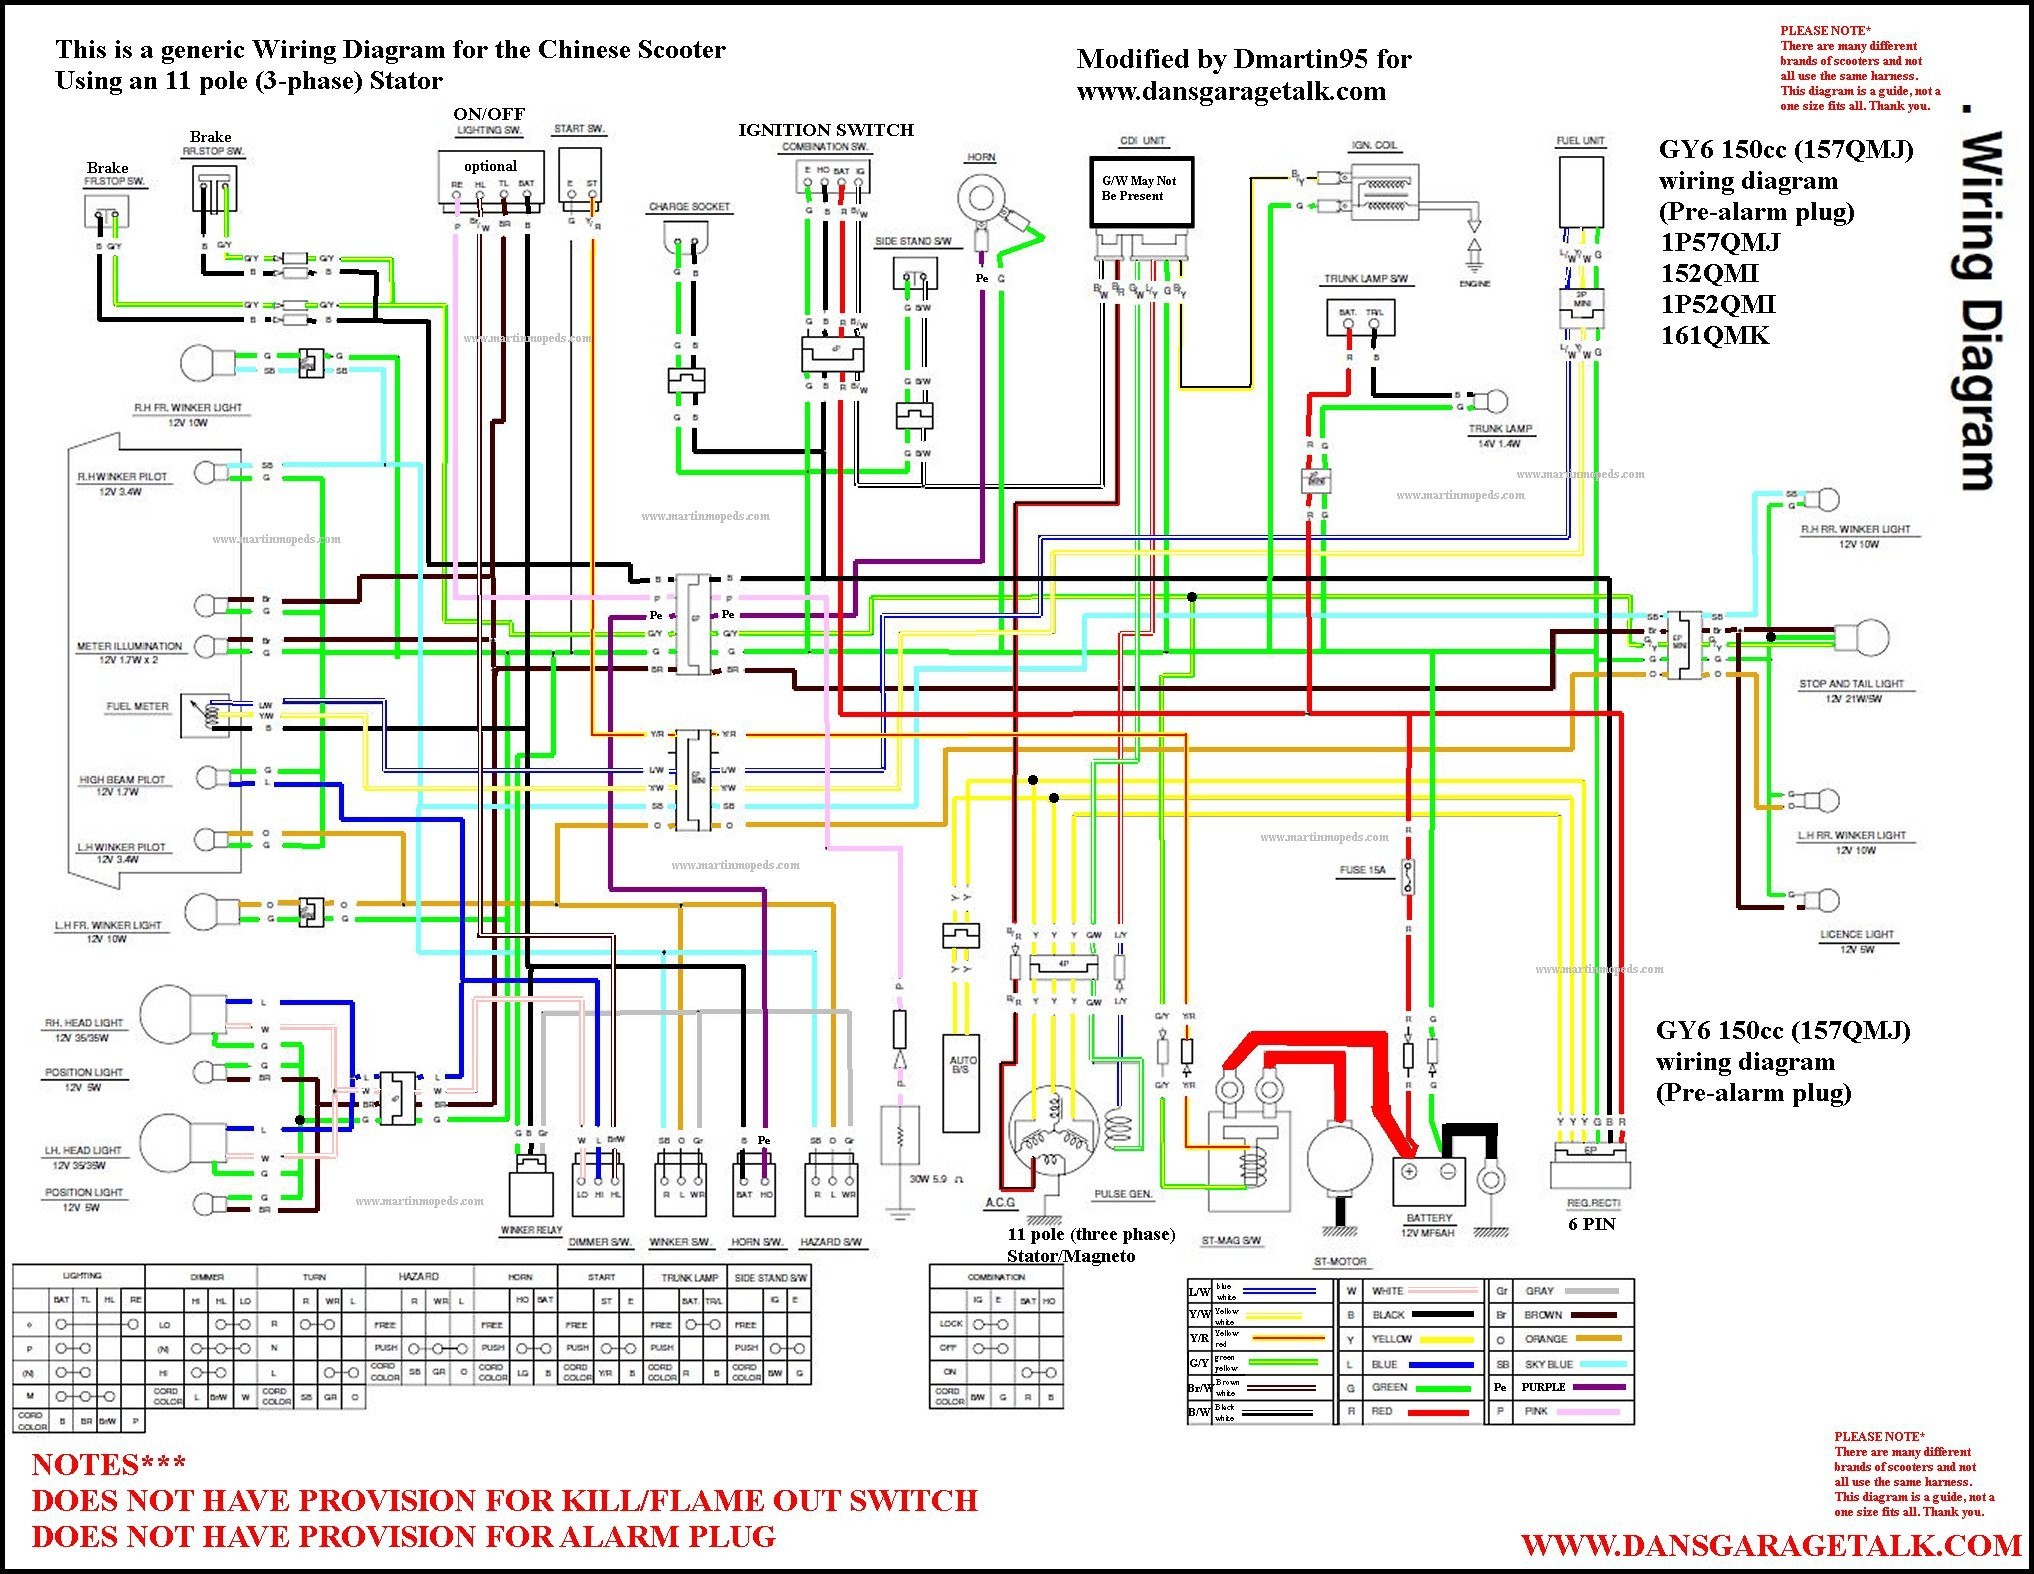 Chinese Scooter Engine Diagram Verucci Wiring Diagram Wiring Diagram Of Chinese Scooter Engine Diagram